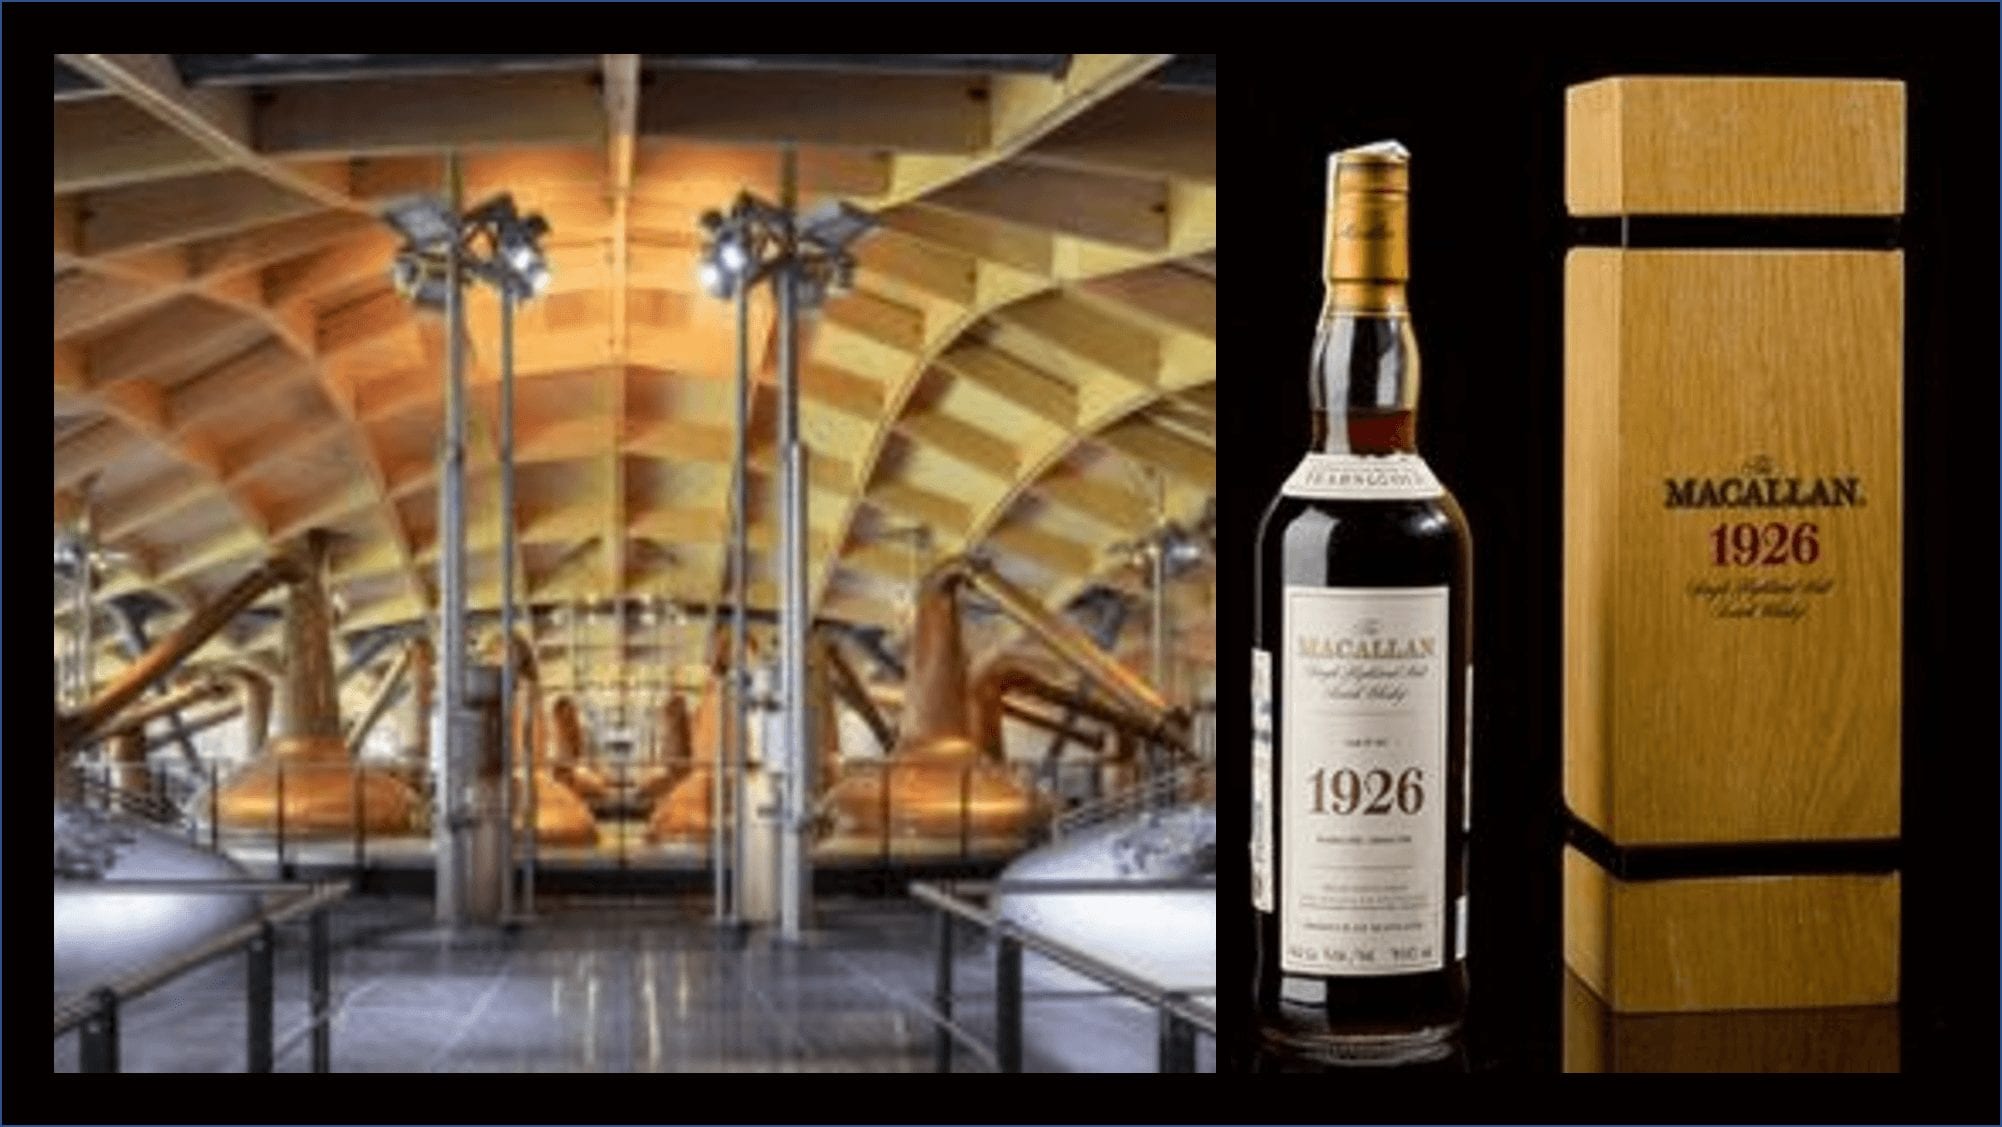 A bottle of Macallan distilled in 1926 breaks auction record at $1.9m!